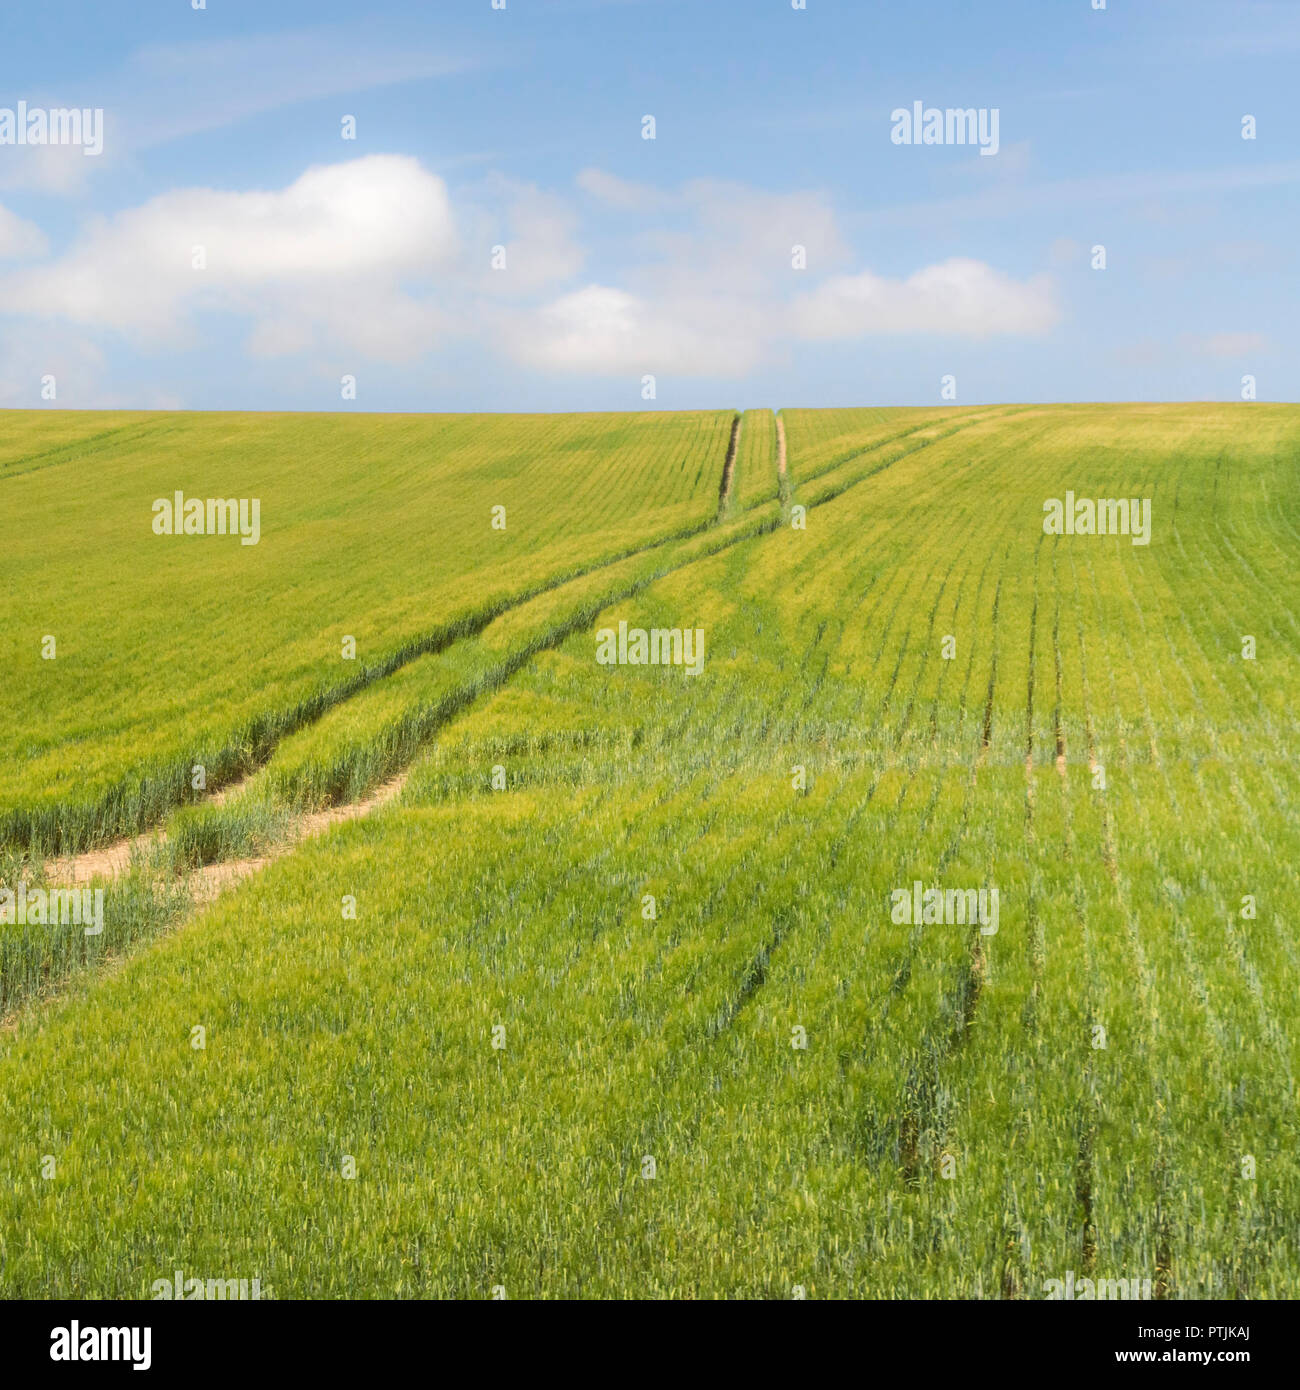 Cropped agricultural field (cereal crop) with blue summer sky. Field crop pattern. Stock Photo